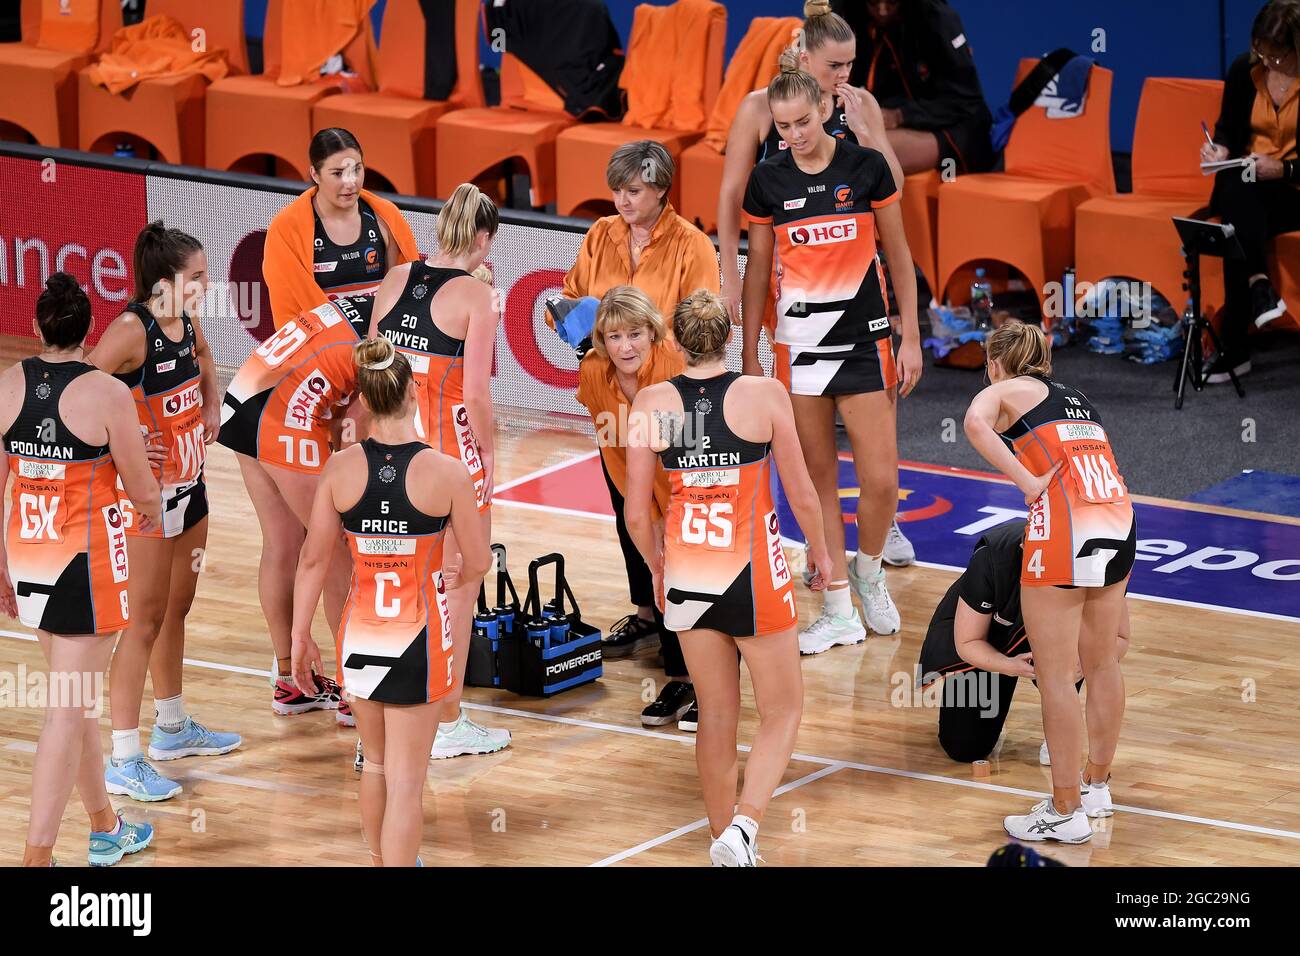 Sydney Australia May 16 Giants Coach Julie Fitzgerald Talks To Her Team During The Suncorp Super Netball Round Three Match Between Giants Netball And Queensland Firebirds On May 16 2021 At